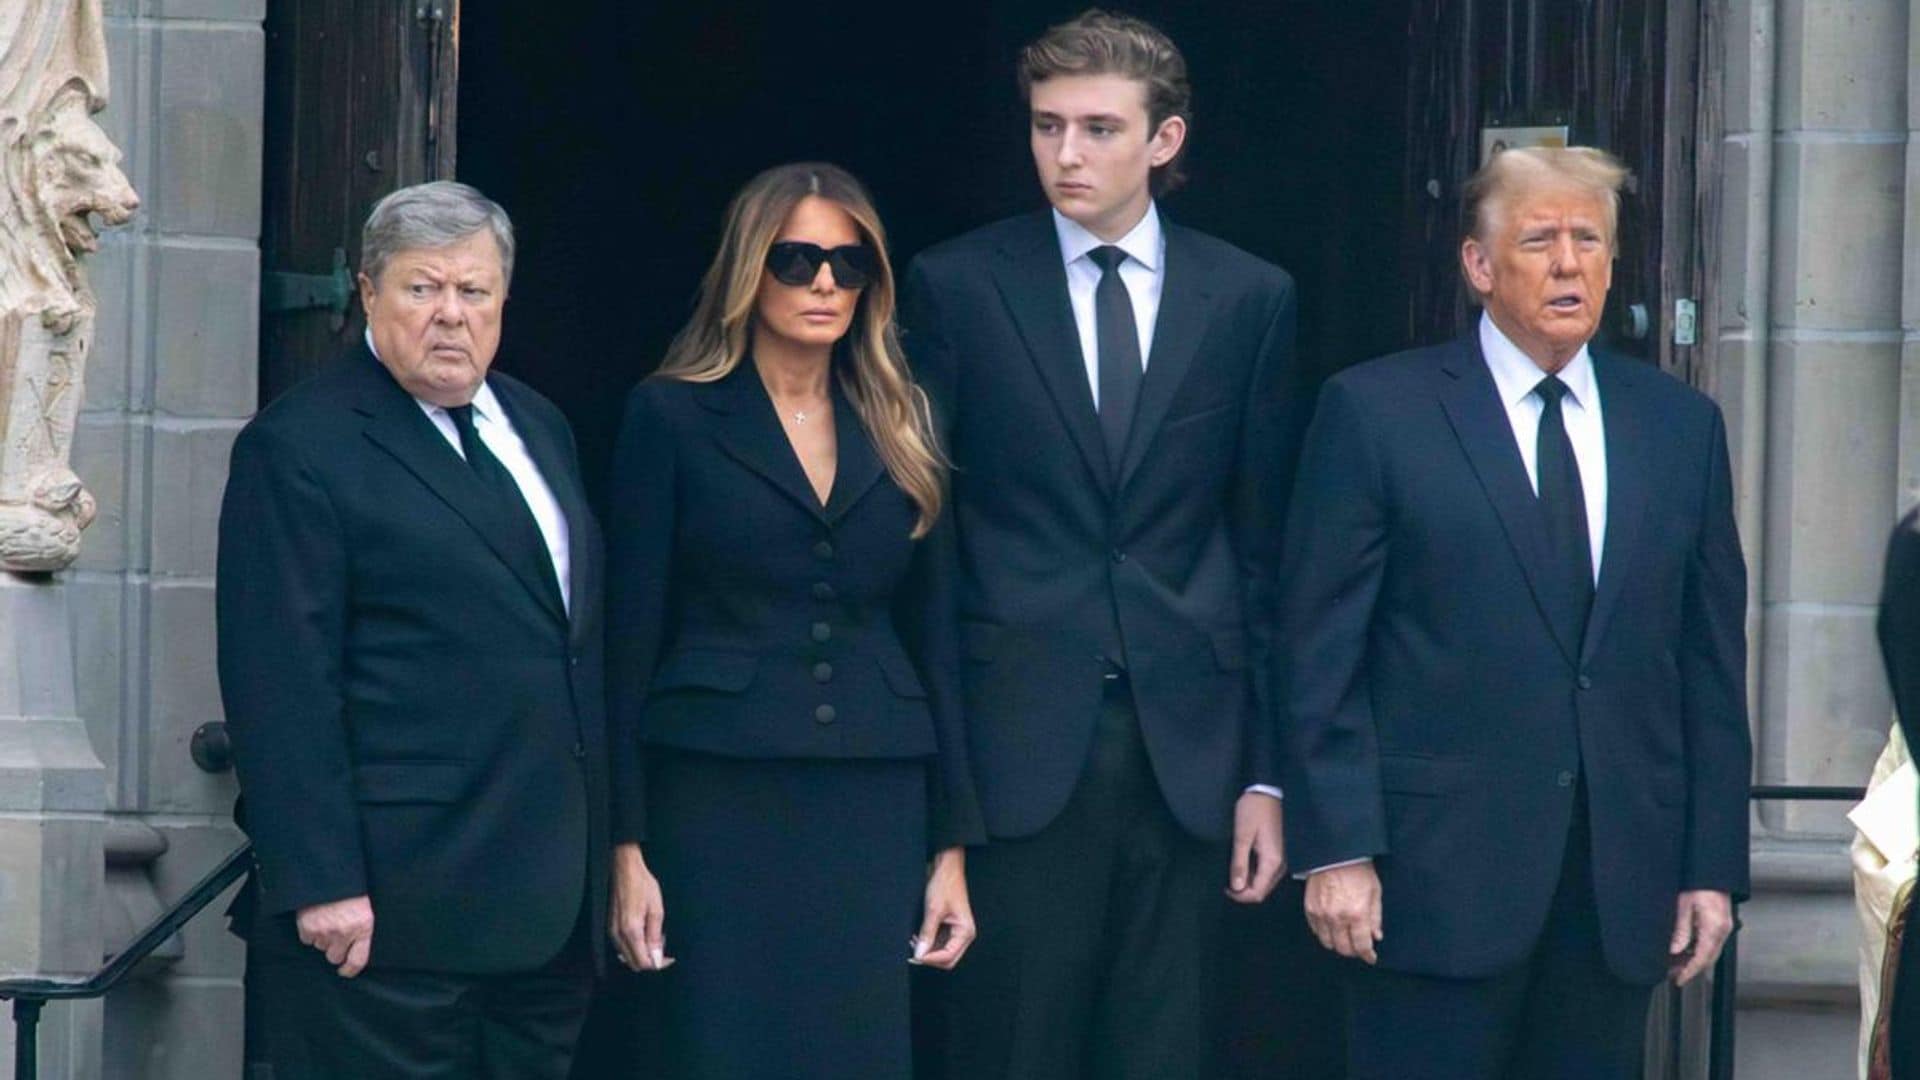 Melania Trump delivers emotional eulogy at her mother’s funeral: Trump family in attendance